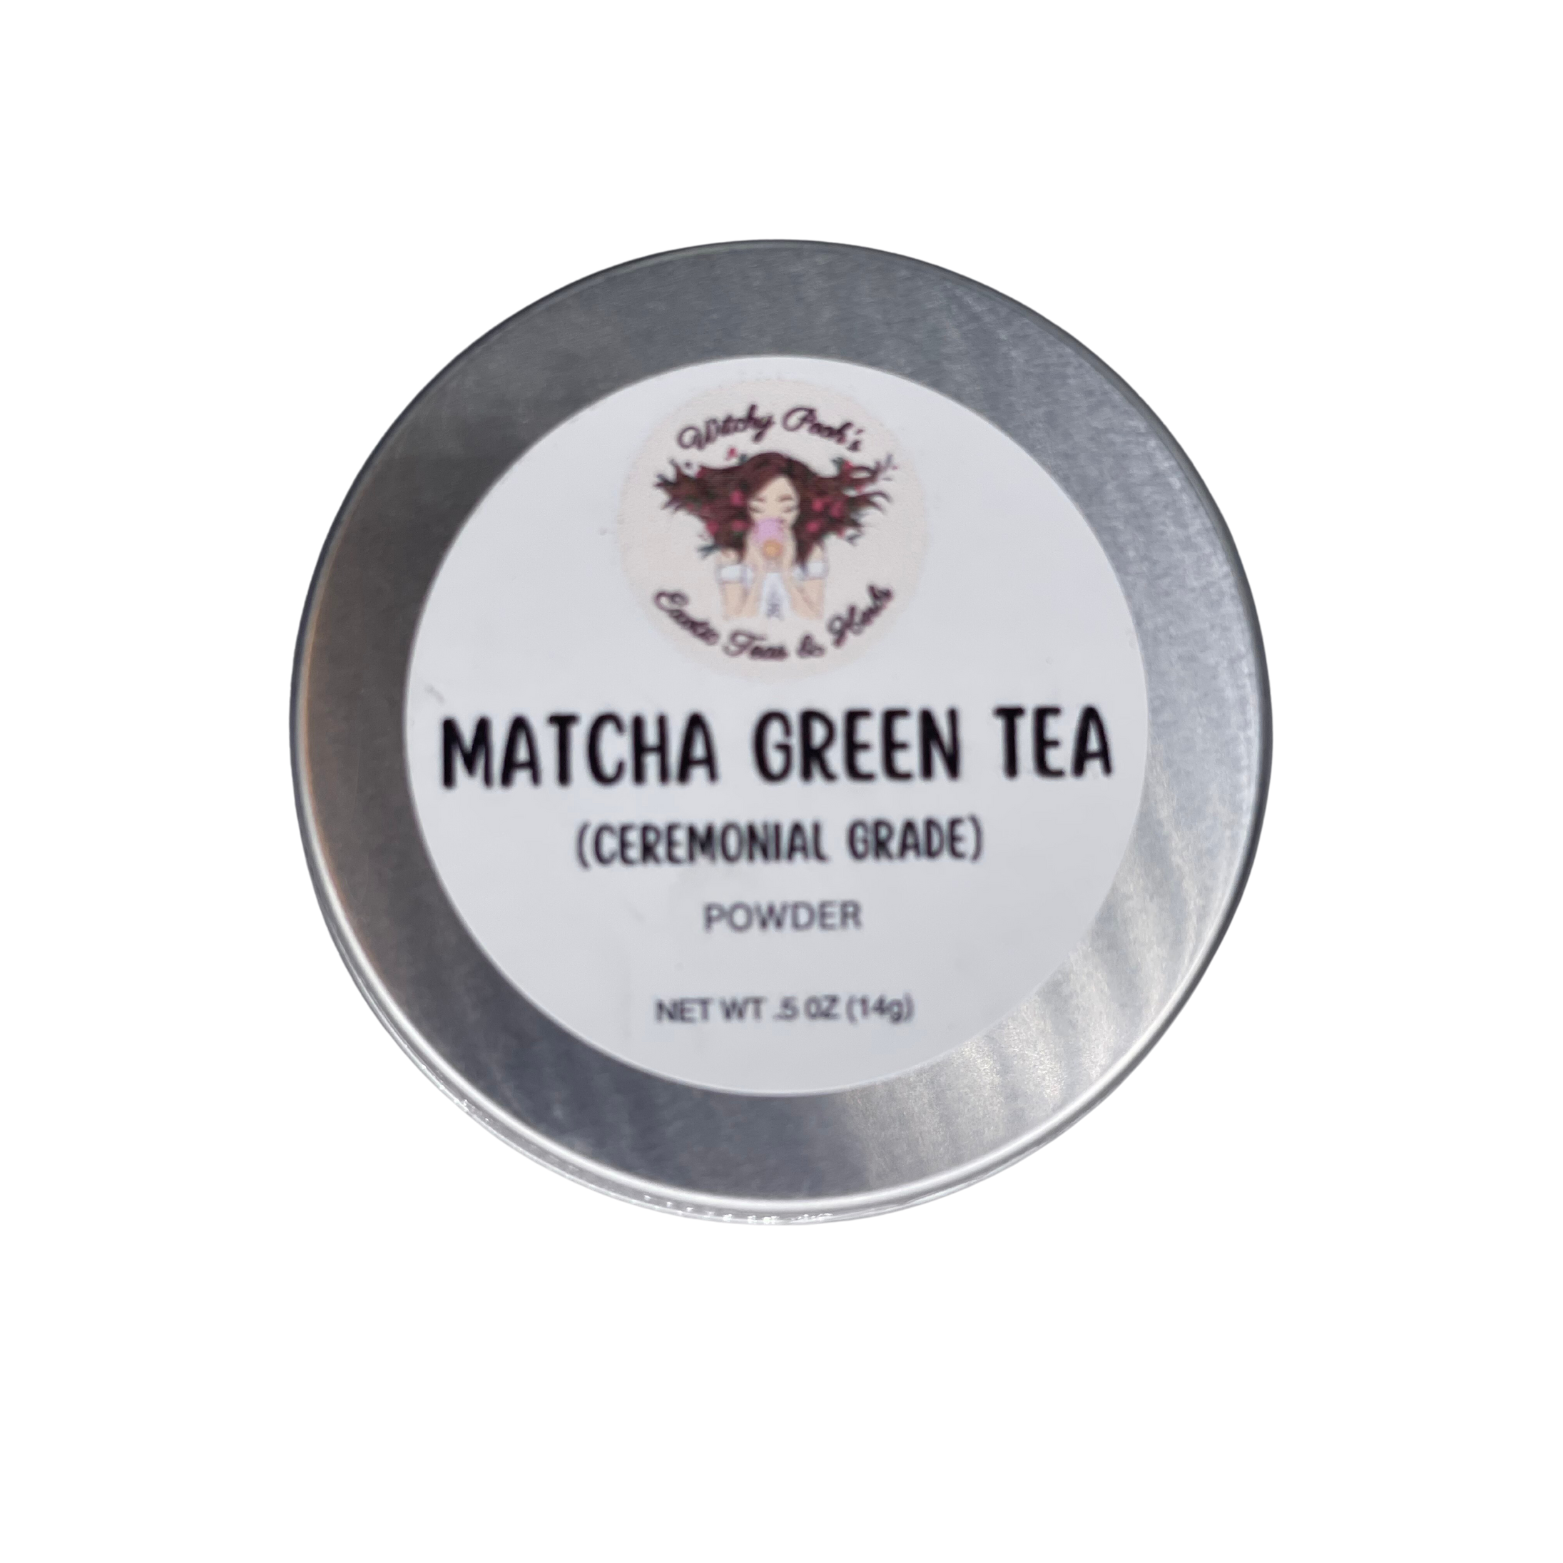 Witchy Pooh's Matcha Green Tea Powder, Ceremonial Grade, High Quality, Vibrate Green Color-1